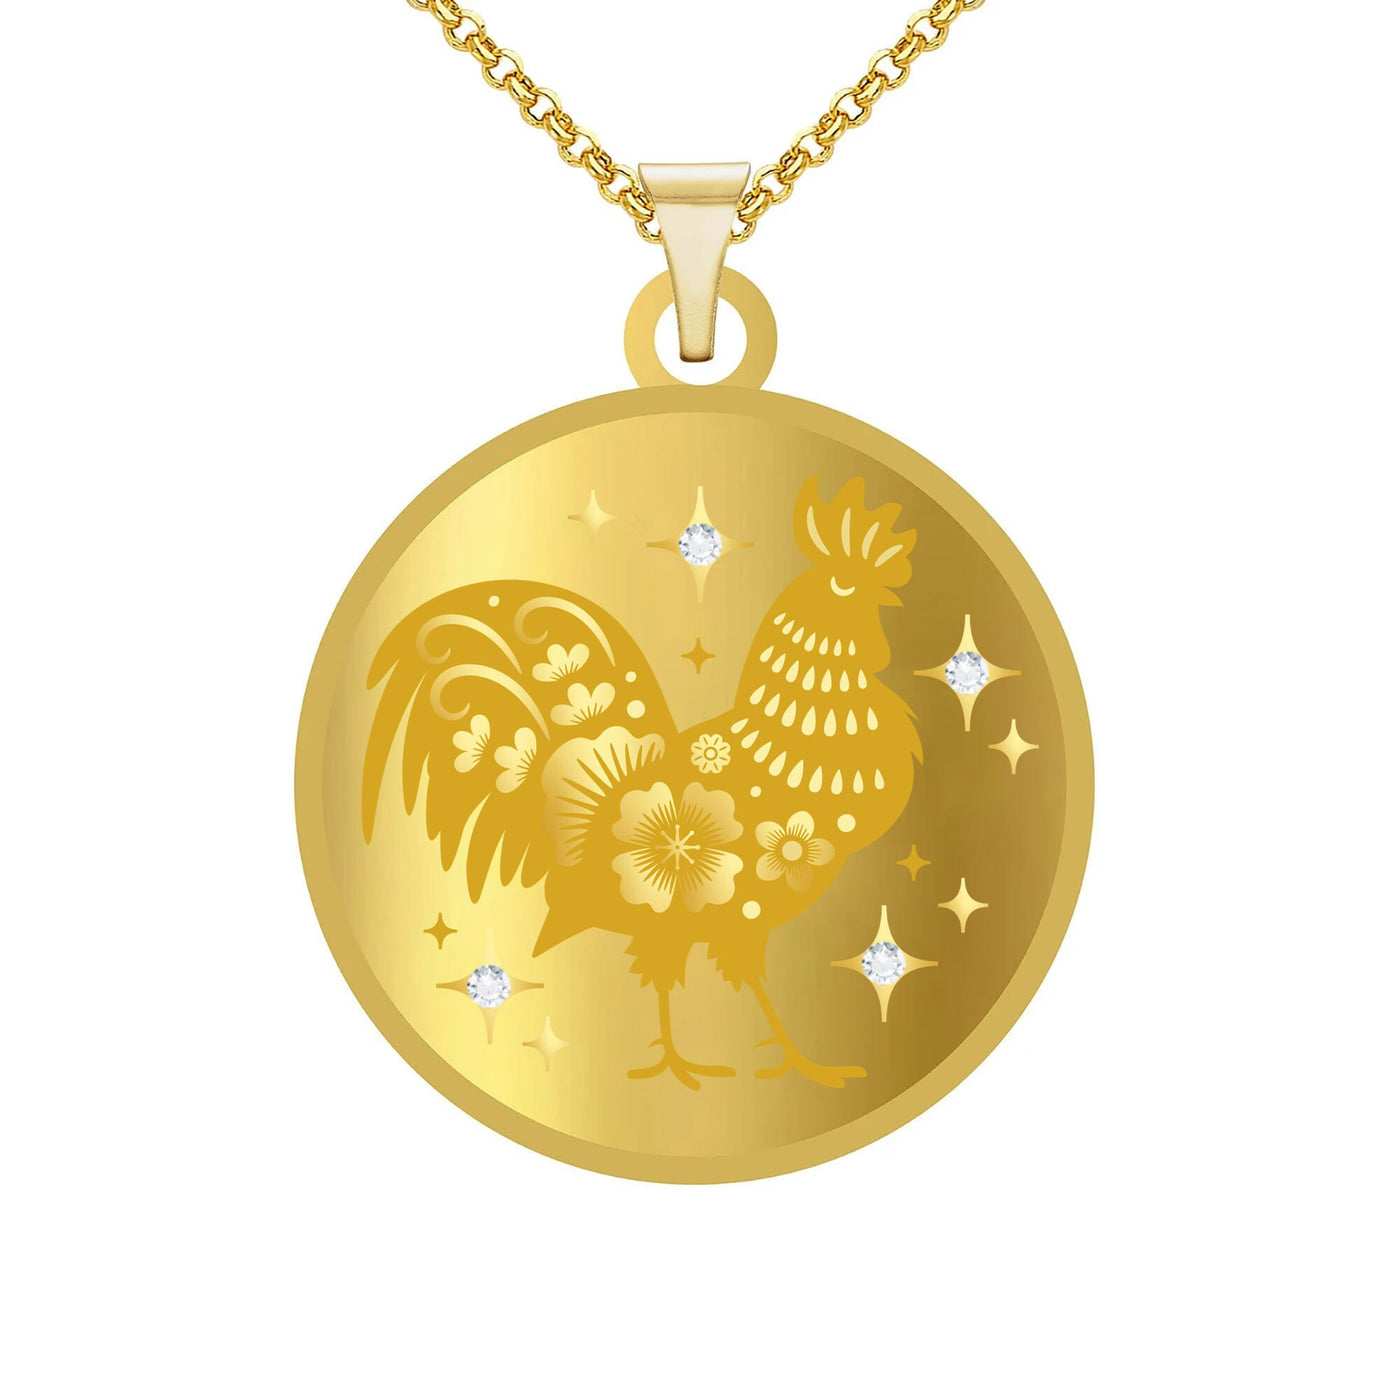 Year of The Rooster (雞) Lunar Zodiac Coin Pendant